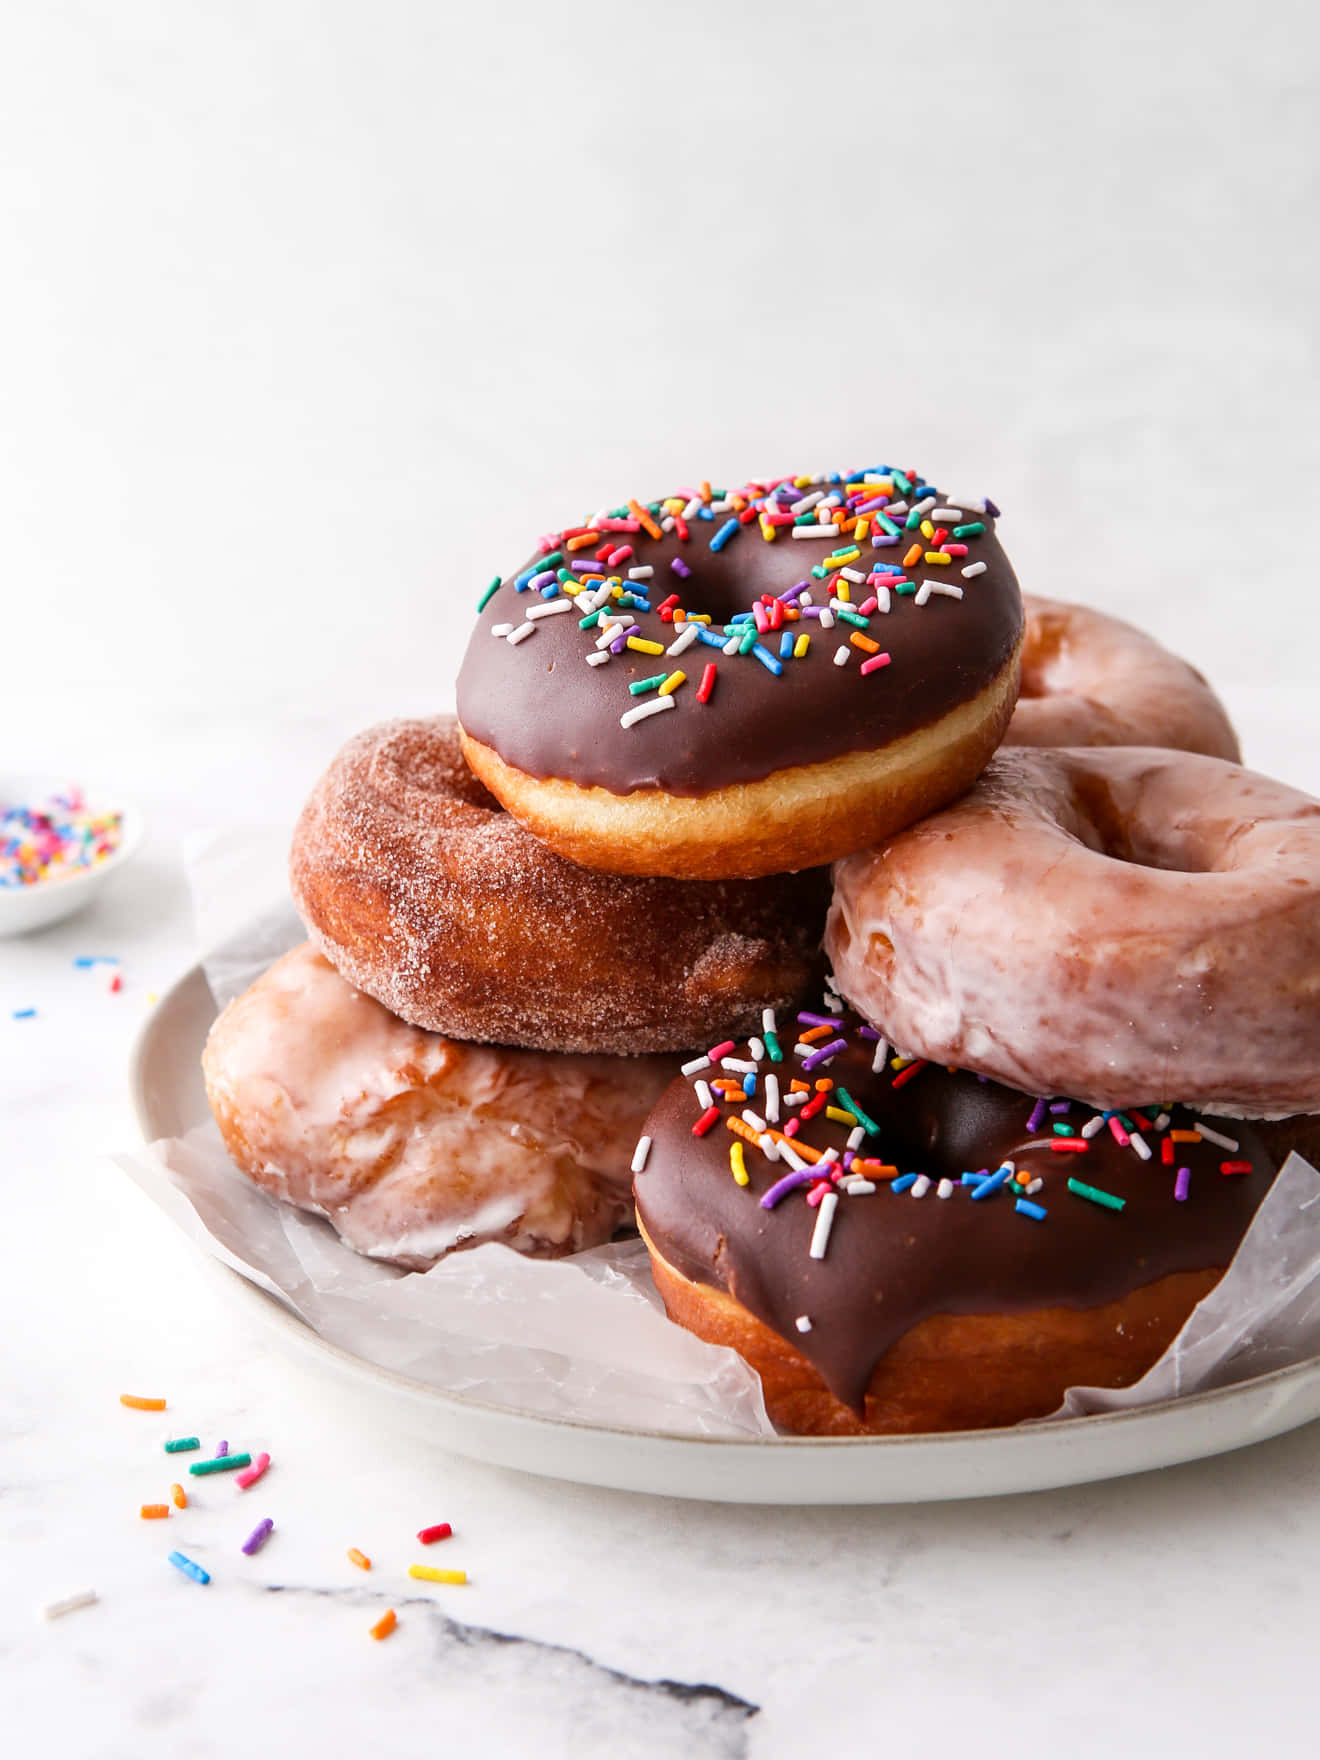 Enjoy a delicious classic donut with pink frosting and sprinkles.